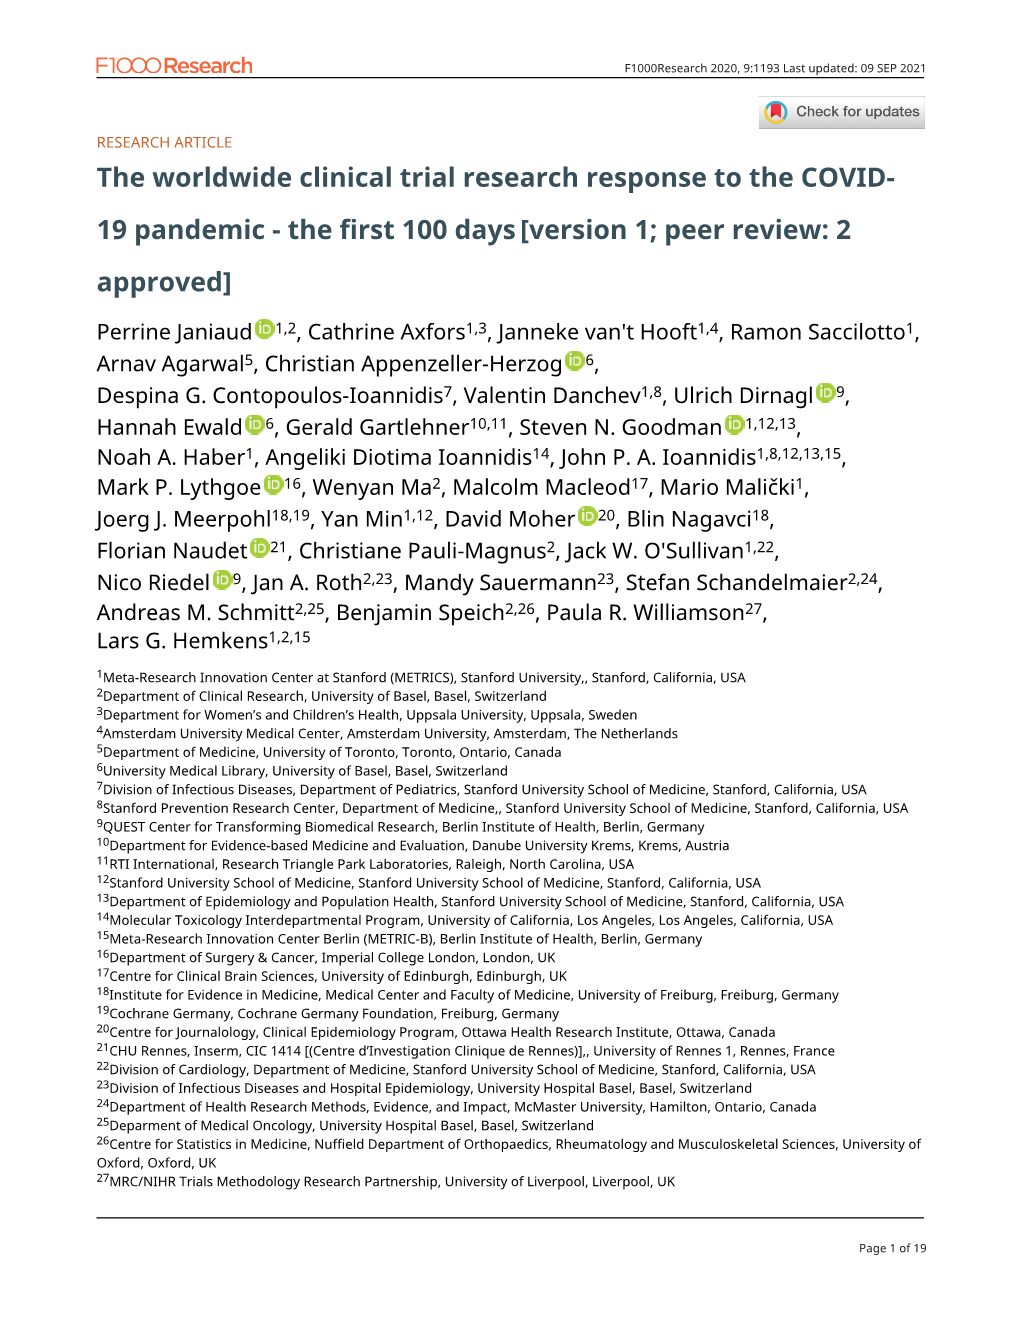 The Worldwide Clinical Trial Research Response to the COVID